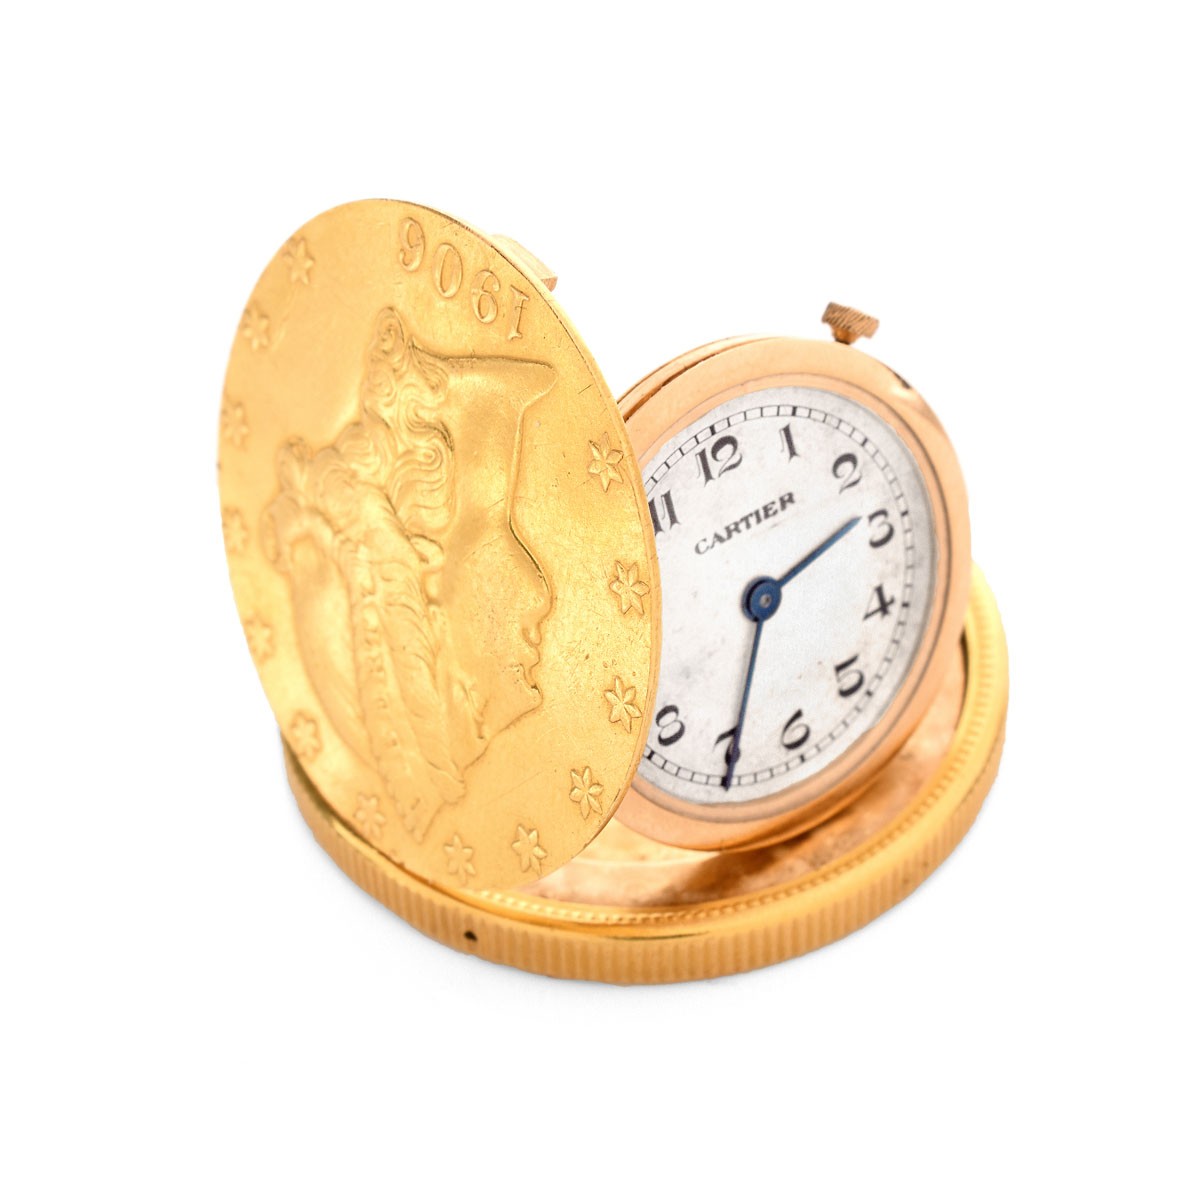 $20 gold coin watch